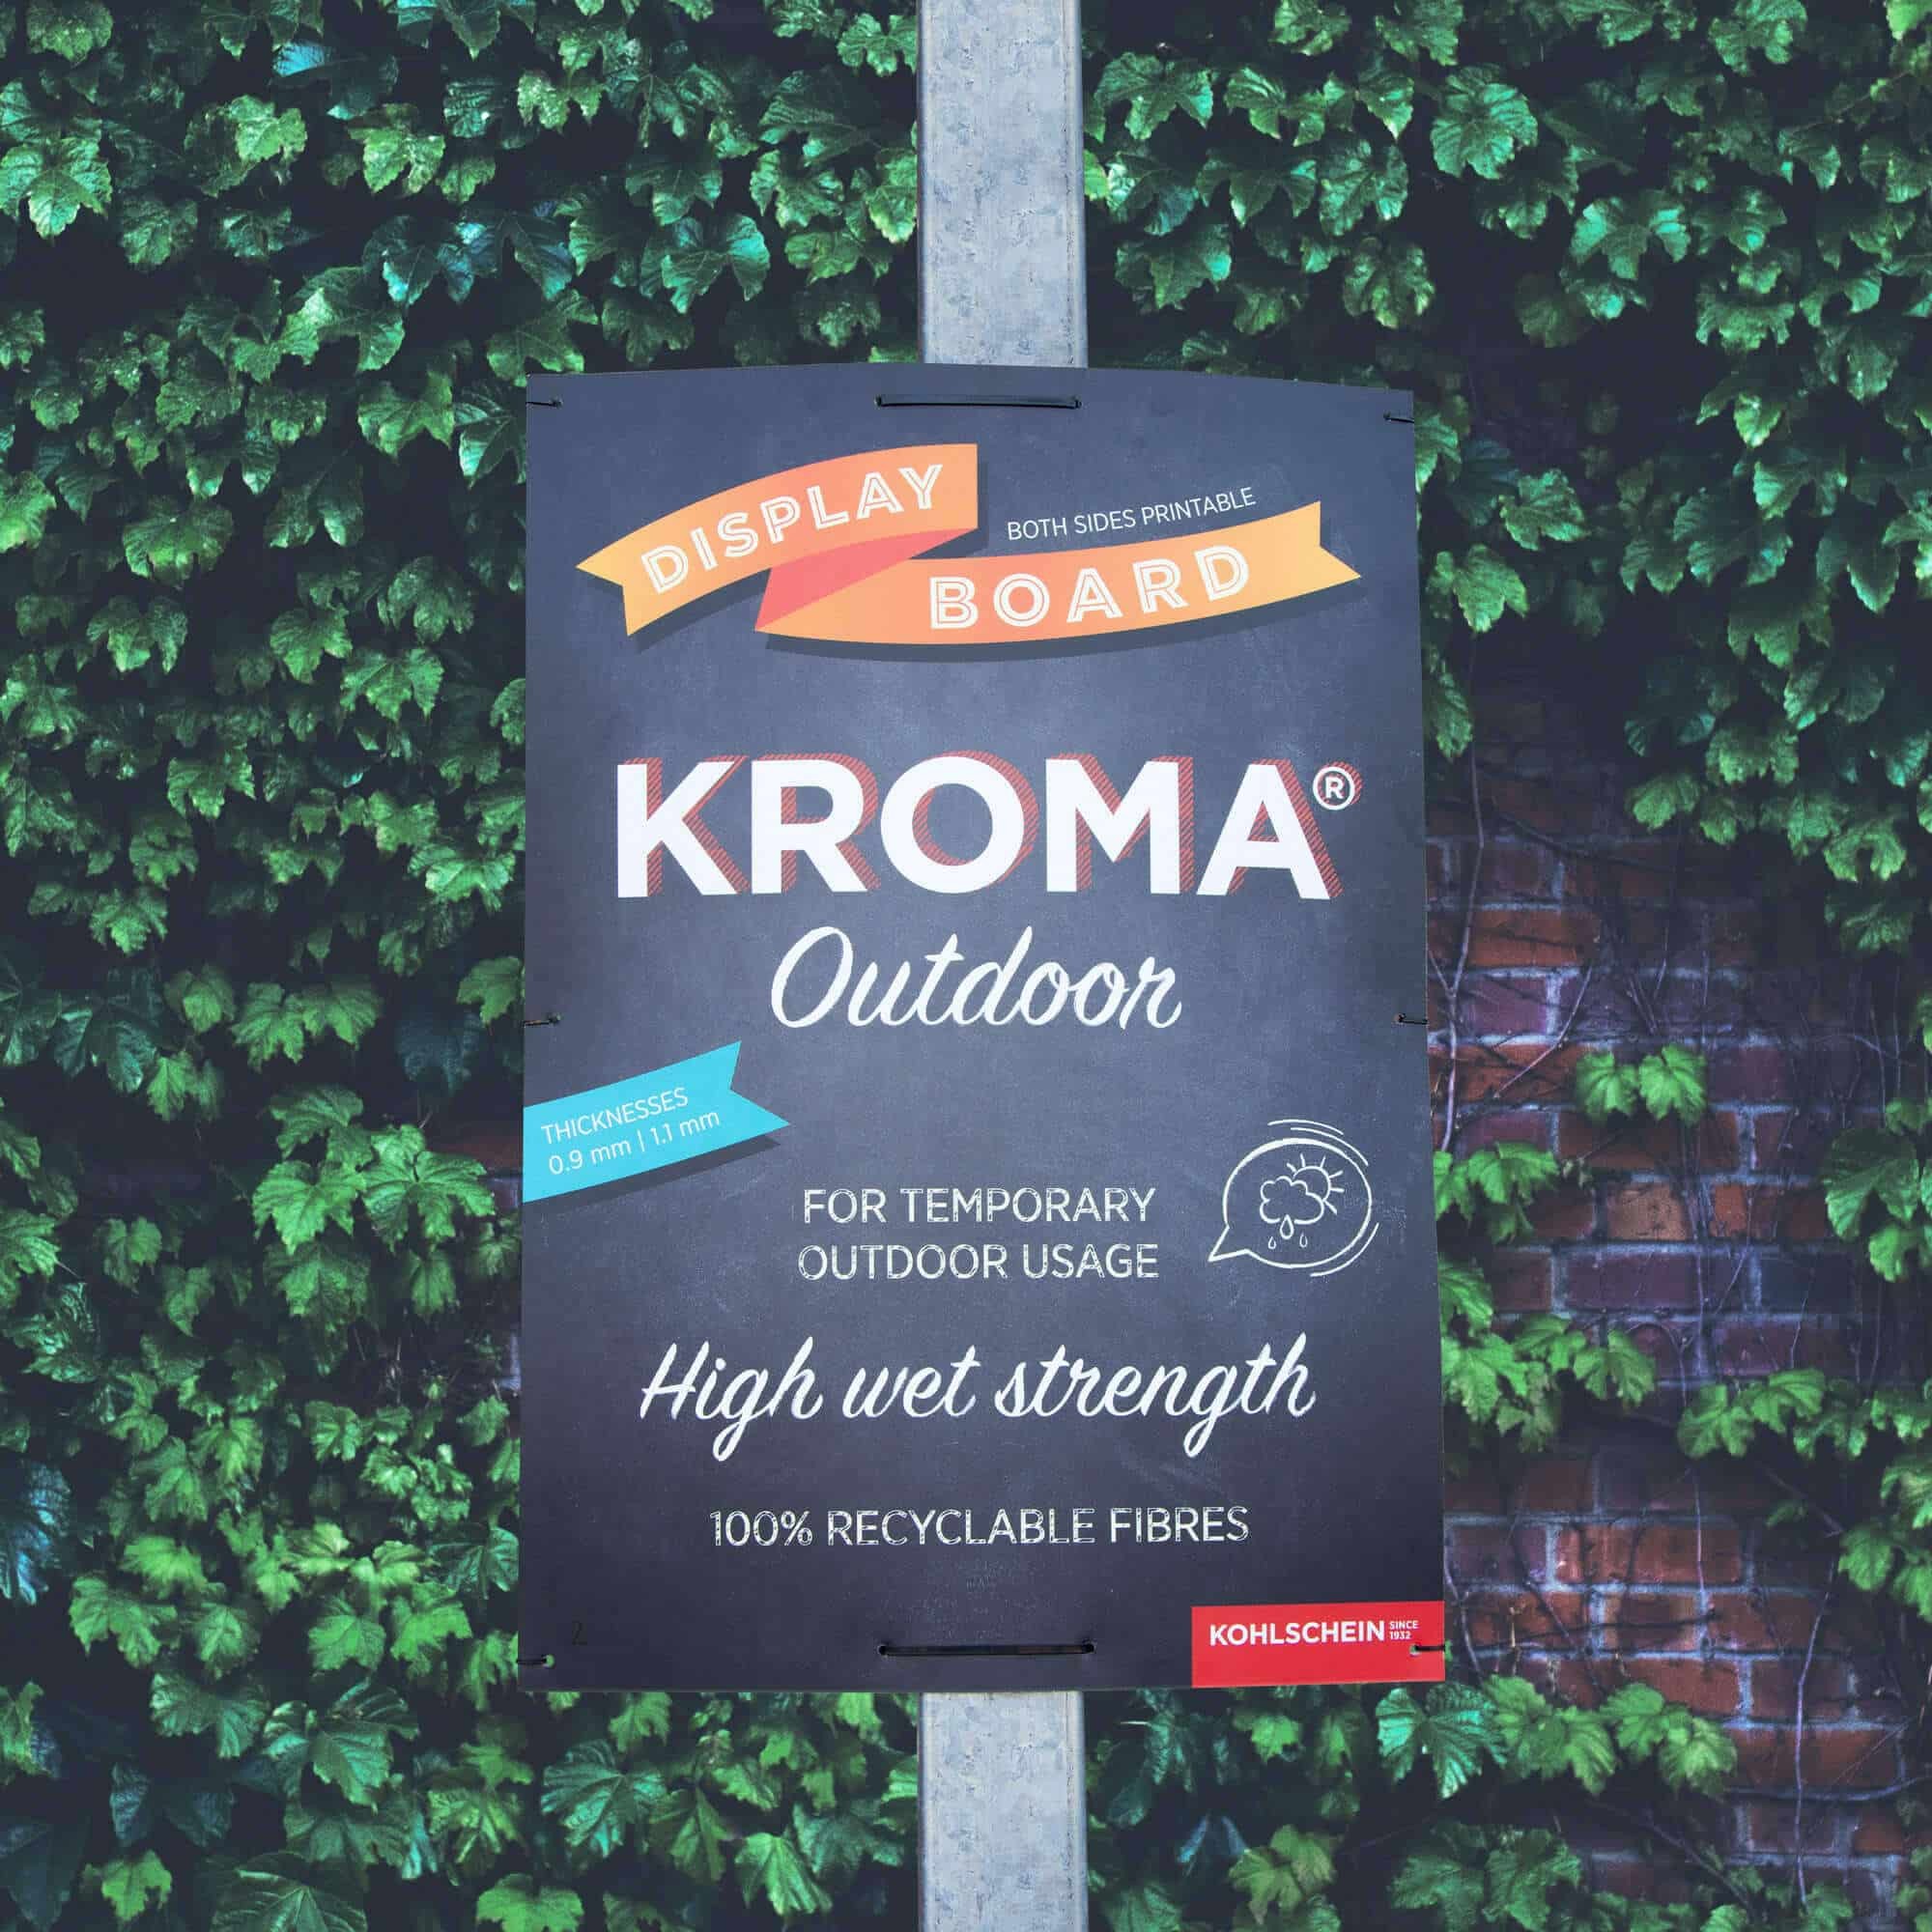 Sign / Poster made of KROMA Outdoor